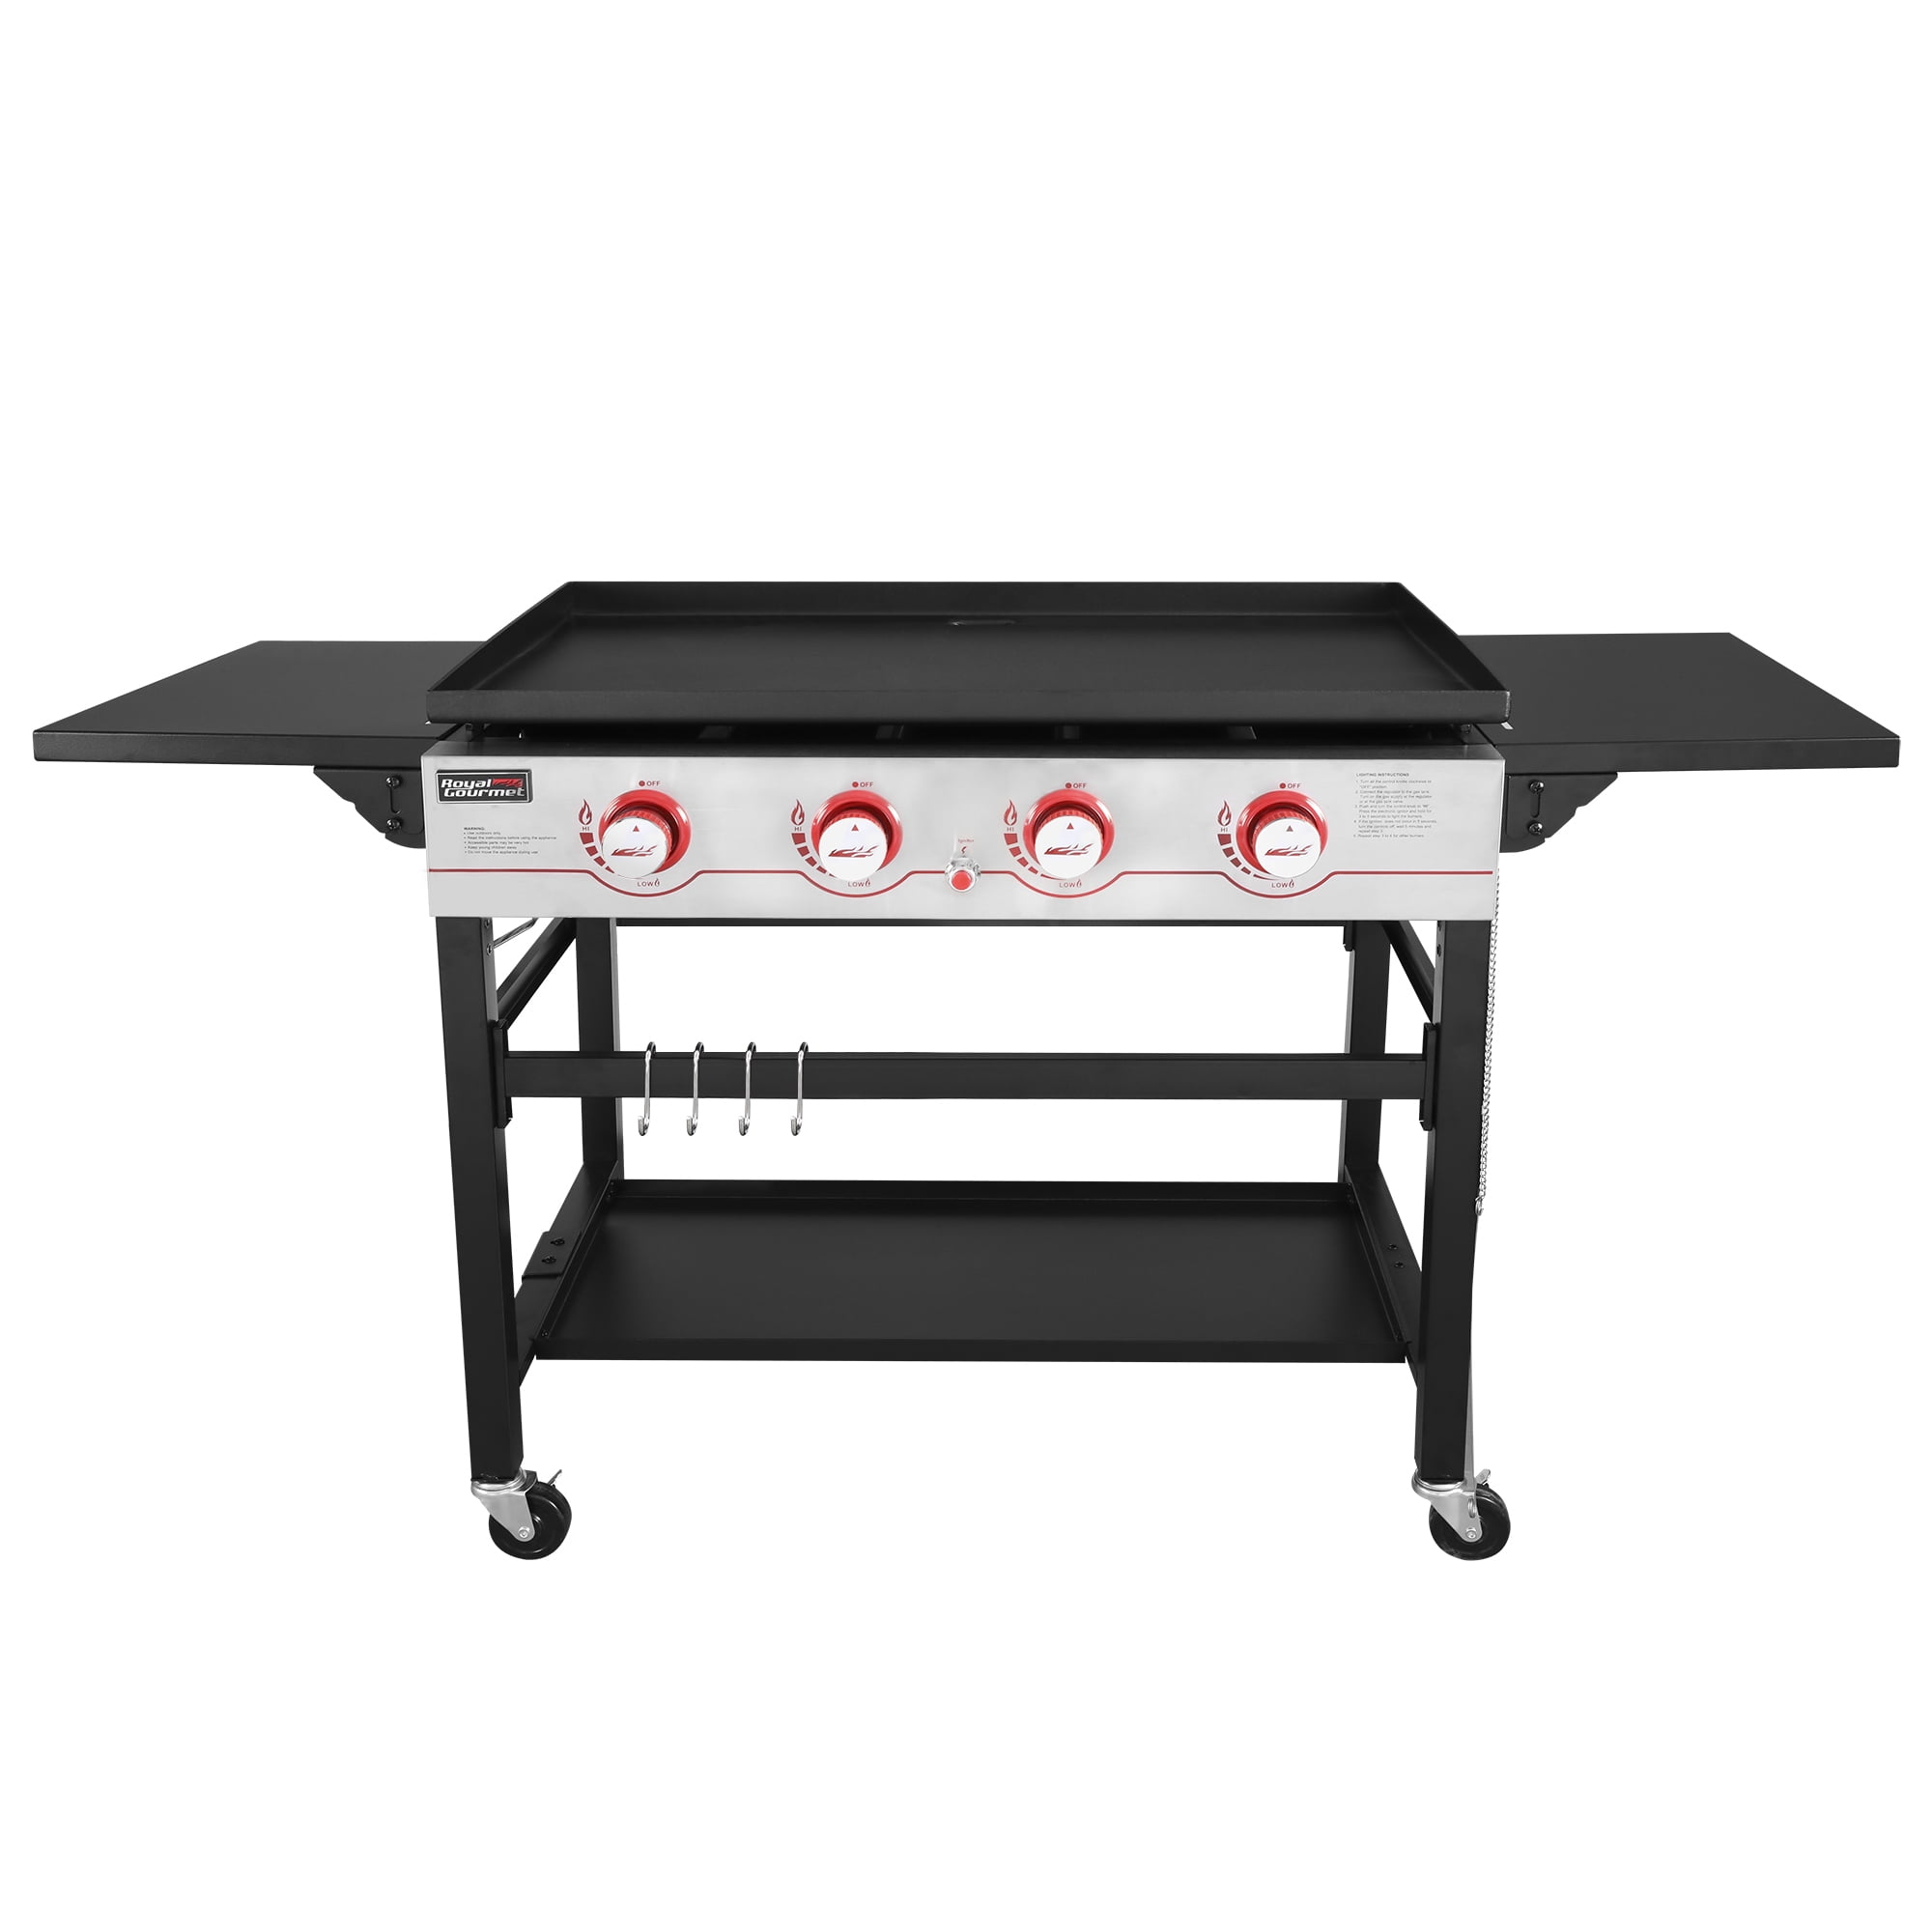 Royal Gourmet Gb4000 Flat Top Gas Grill, Outdoor Gourmet 6 Burner Stainless Steel Propane Griddle Reviews